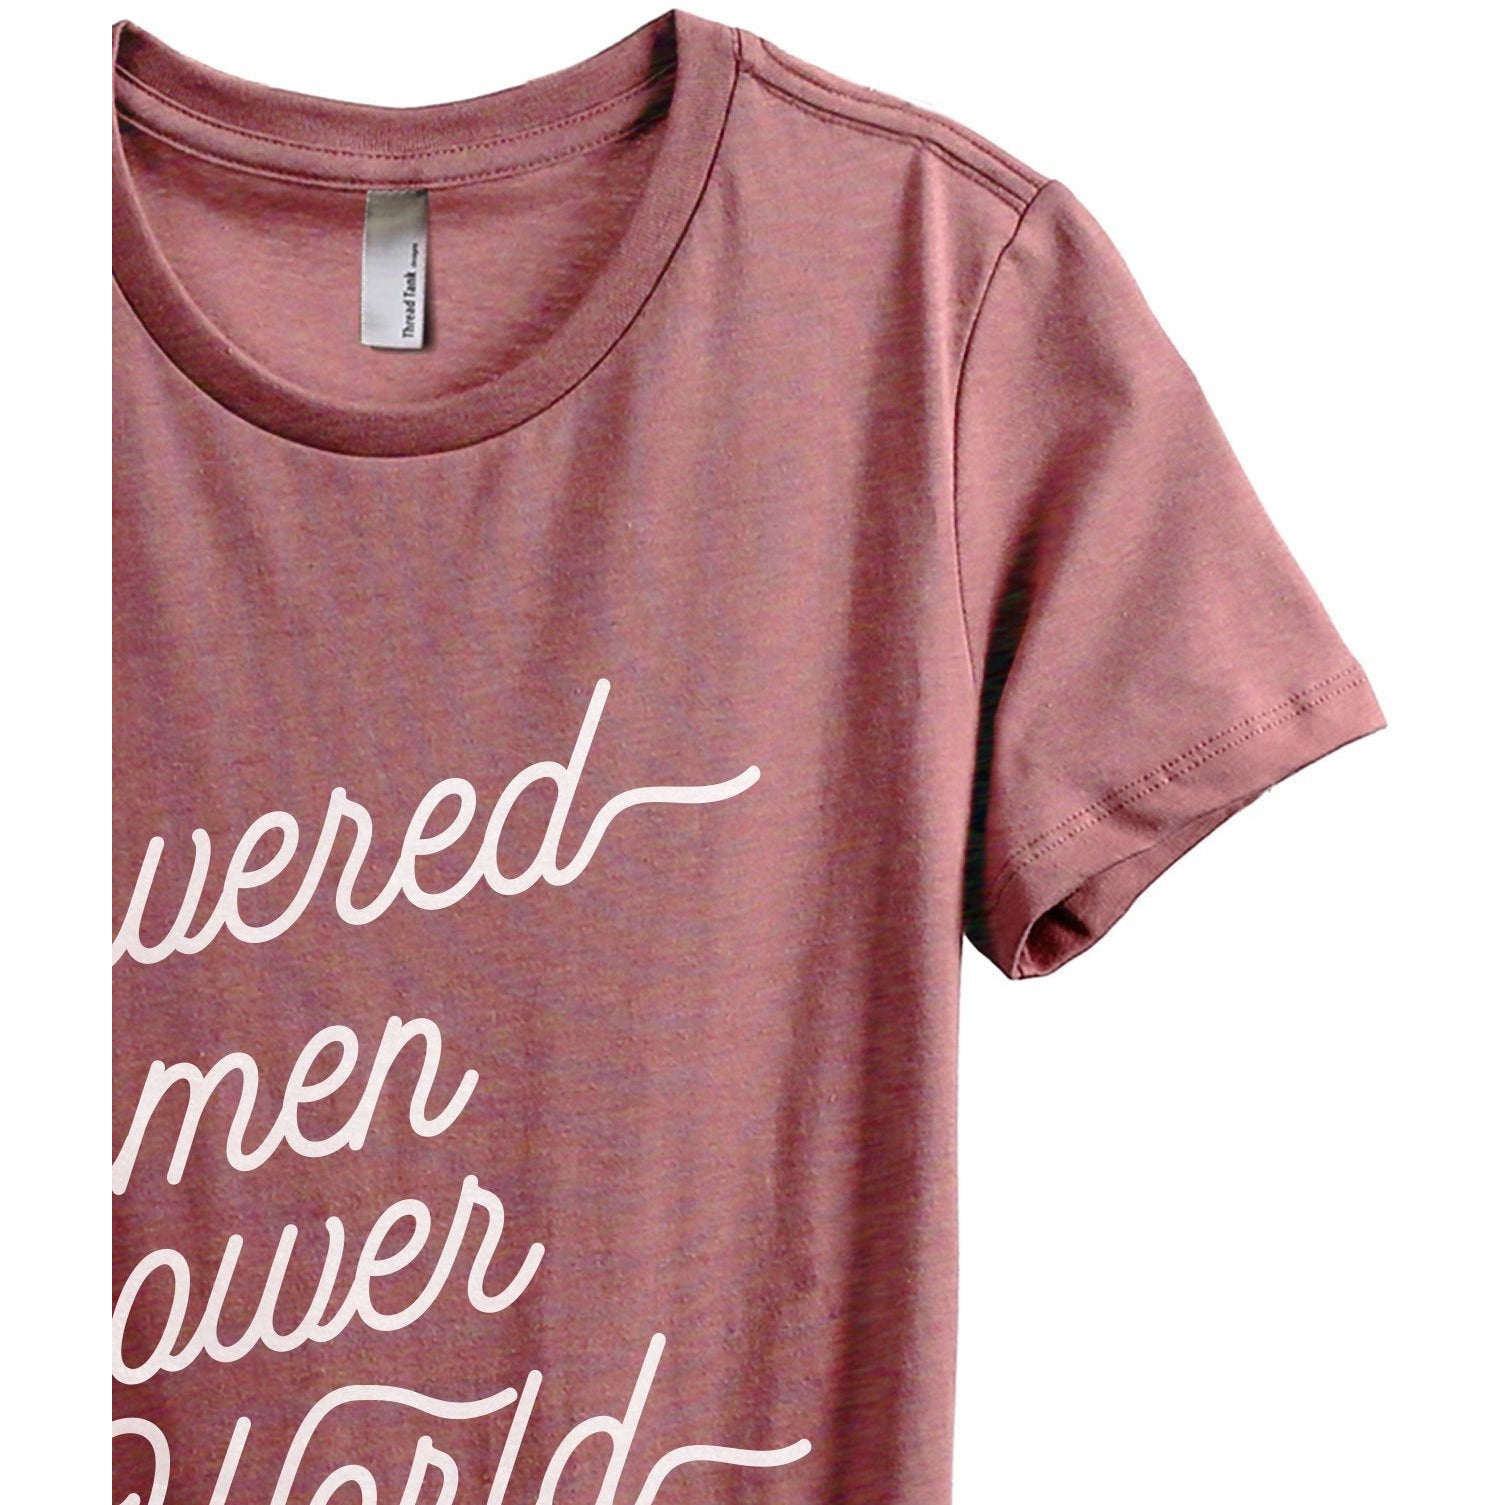 Empowered Women Empower The World Women's Relaxed Crewneck T-Shirt Top Tee Heather Rouge Zoom Details
